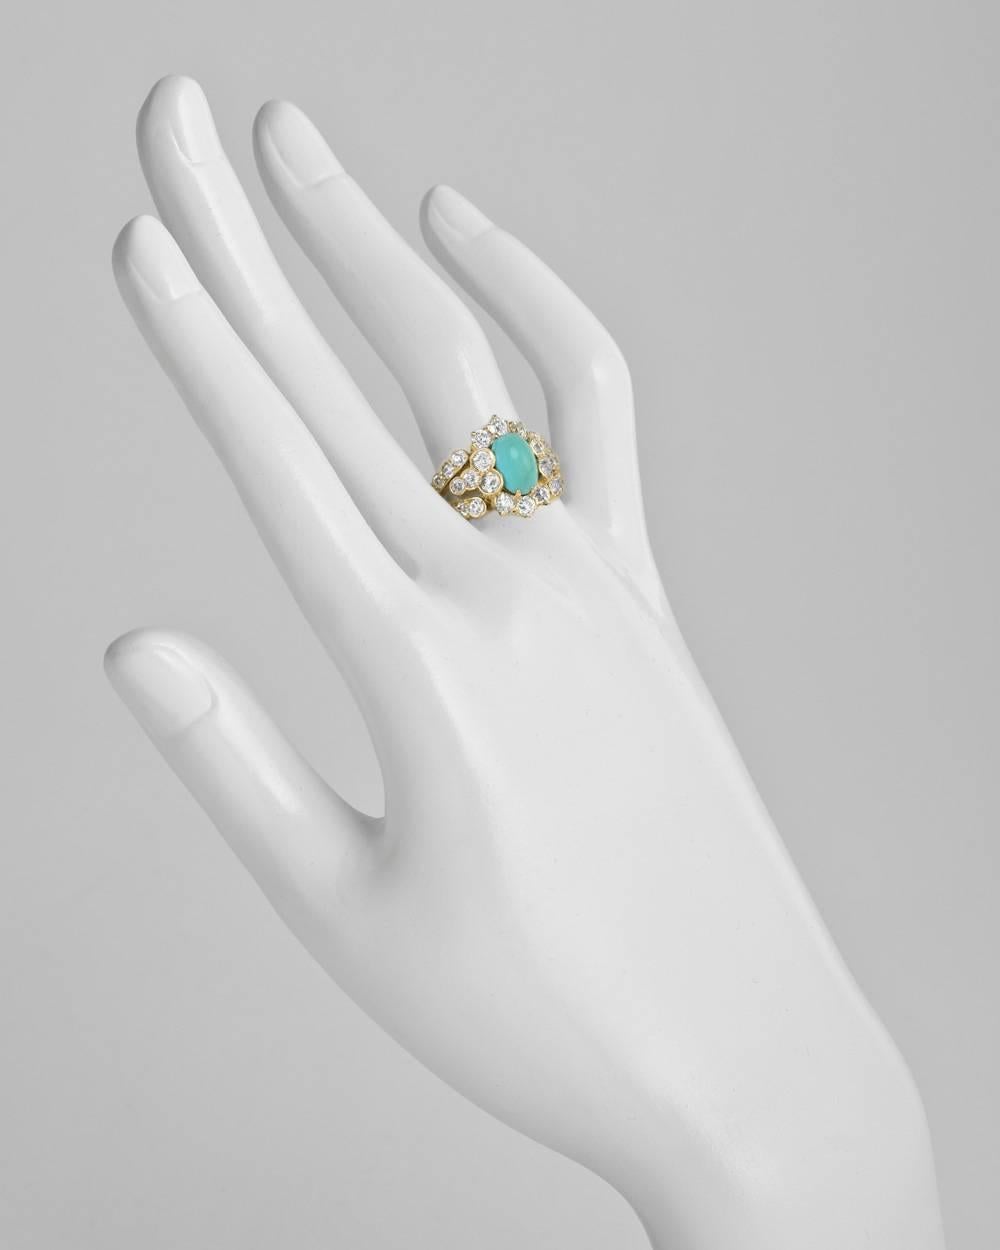 Antique dress ring, centering an oval-shaped cabochon turquoise measuring 9.2 x 6mm, surrounded by old European-cut diamonds, mounted in 18k yellow gold, circa 1890s. Thirty-two diamonds weighing approximately 1.80 total carats. Size 8 (resizable to